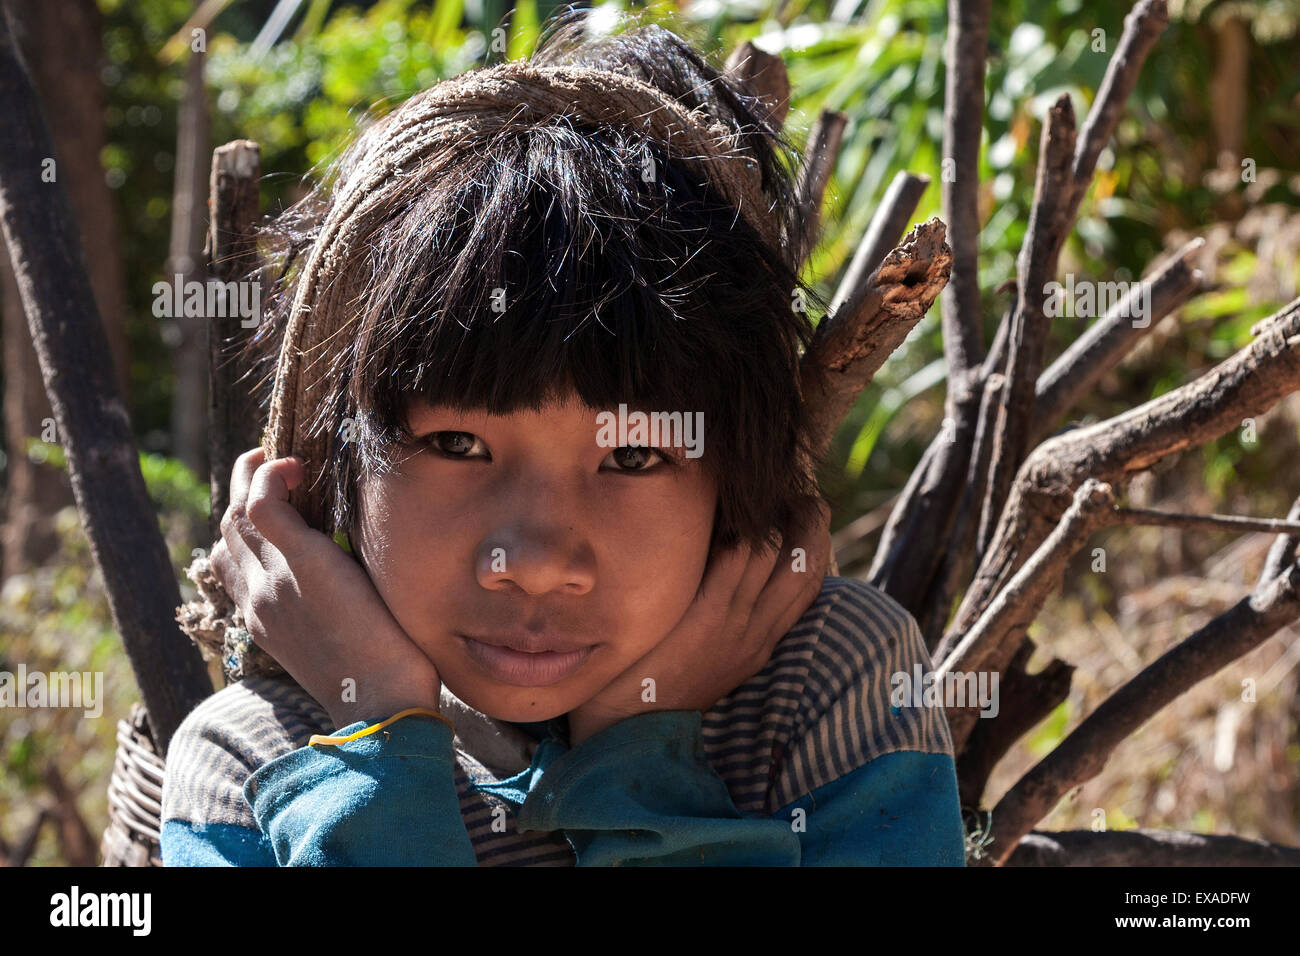 Girl from Palaung tribe carrying firewood, Portrait, Taung Ni Village, Kalaw, Shan State, Myanmar Stock Photo